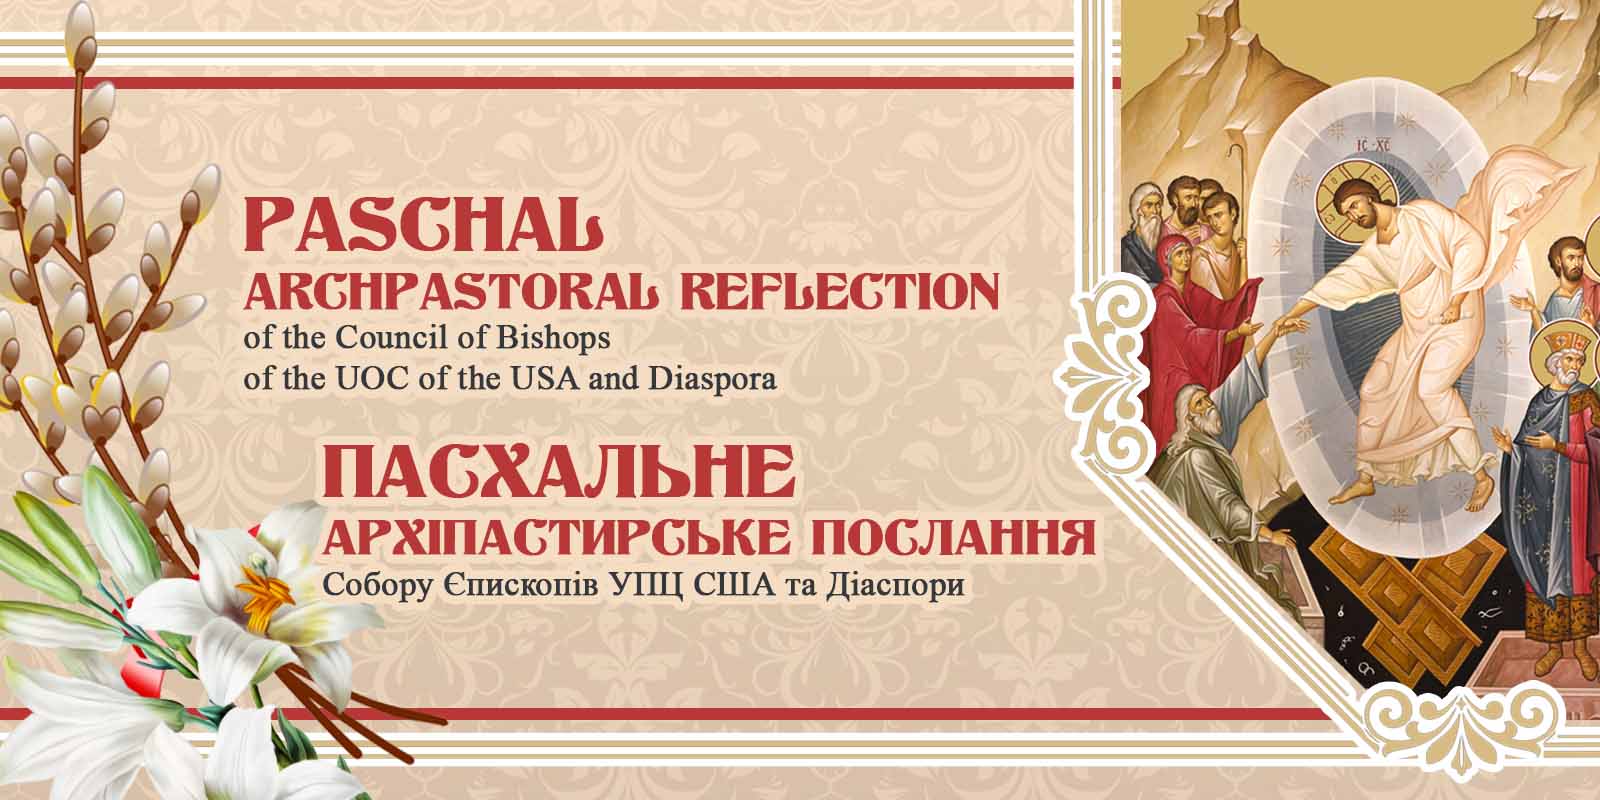 PASCHA Archpastoral Reflection of the Council of Bishops of the UOC of the USA and Diaspora